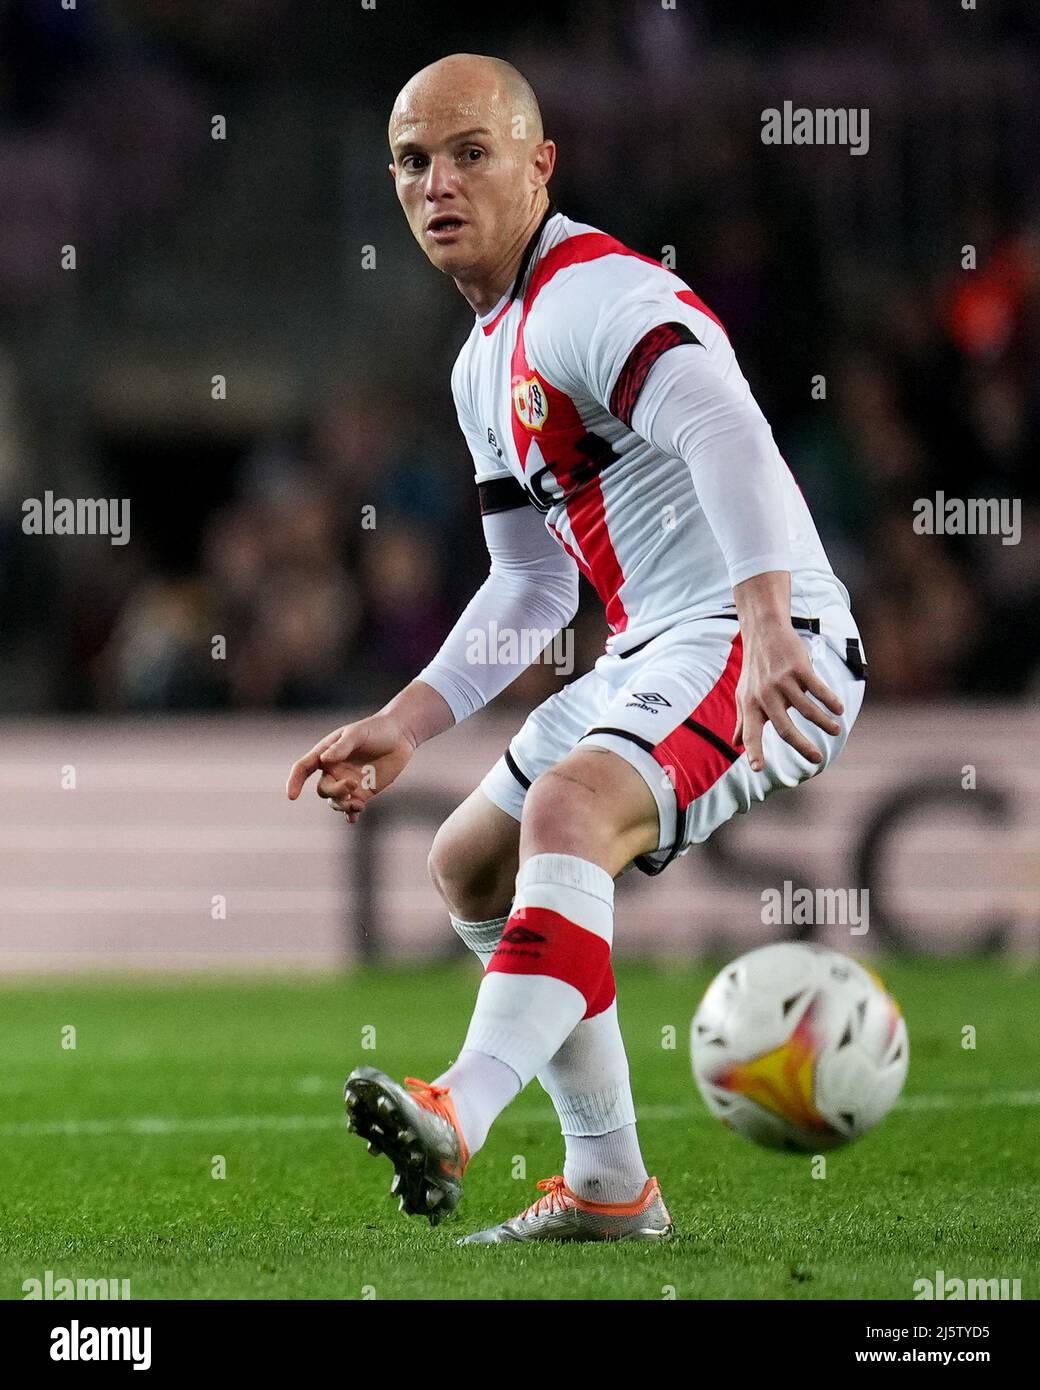 Isi Palazon of Rayo Vallecano during the La Liga match between FC Barcelona and Rayo Vallecano played at Camp Nou Stadium on April 24, 2022 in Barcelona, Spain. (Photo by Sergio Ruiz / PRESSINPHOTO) Stock Photo